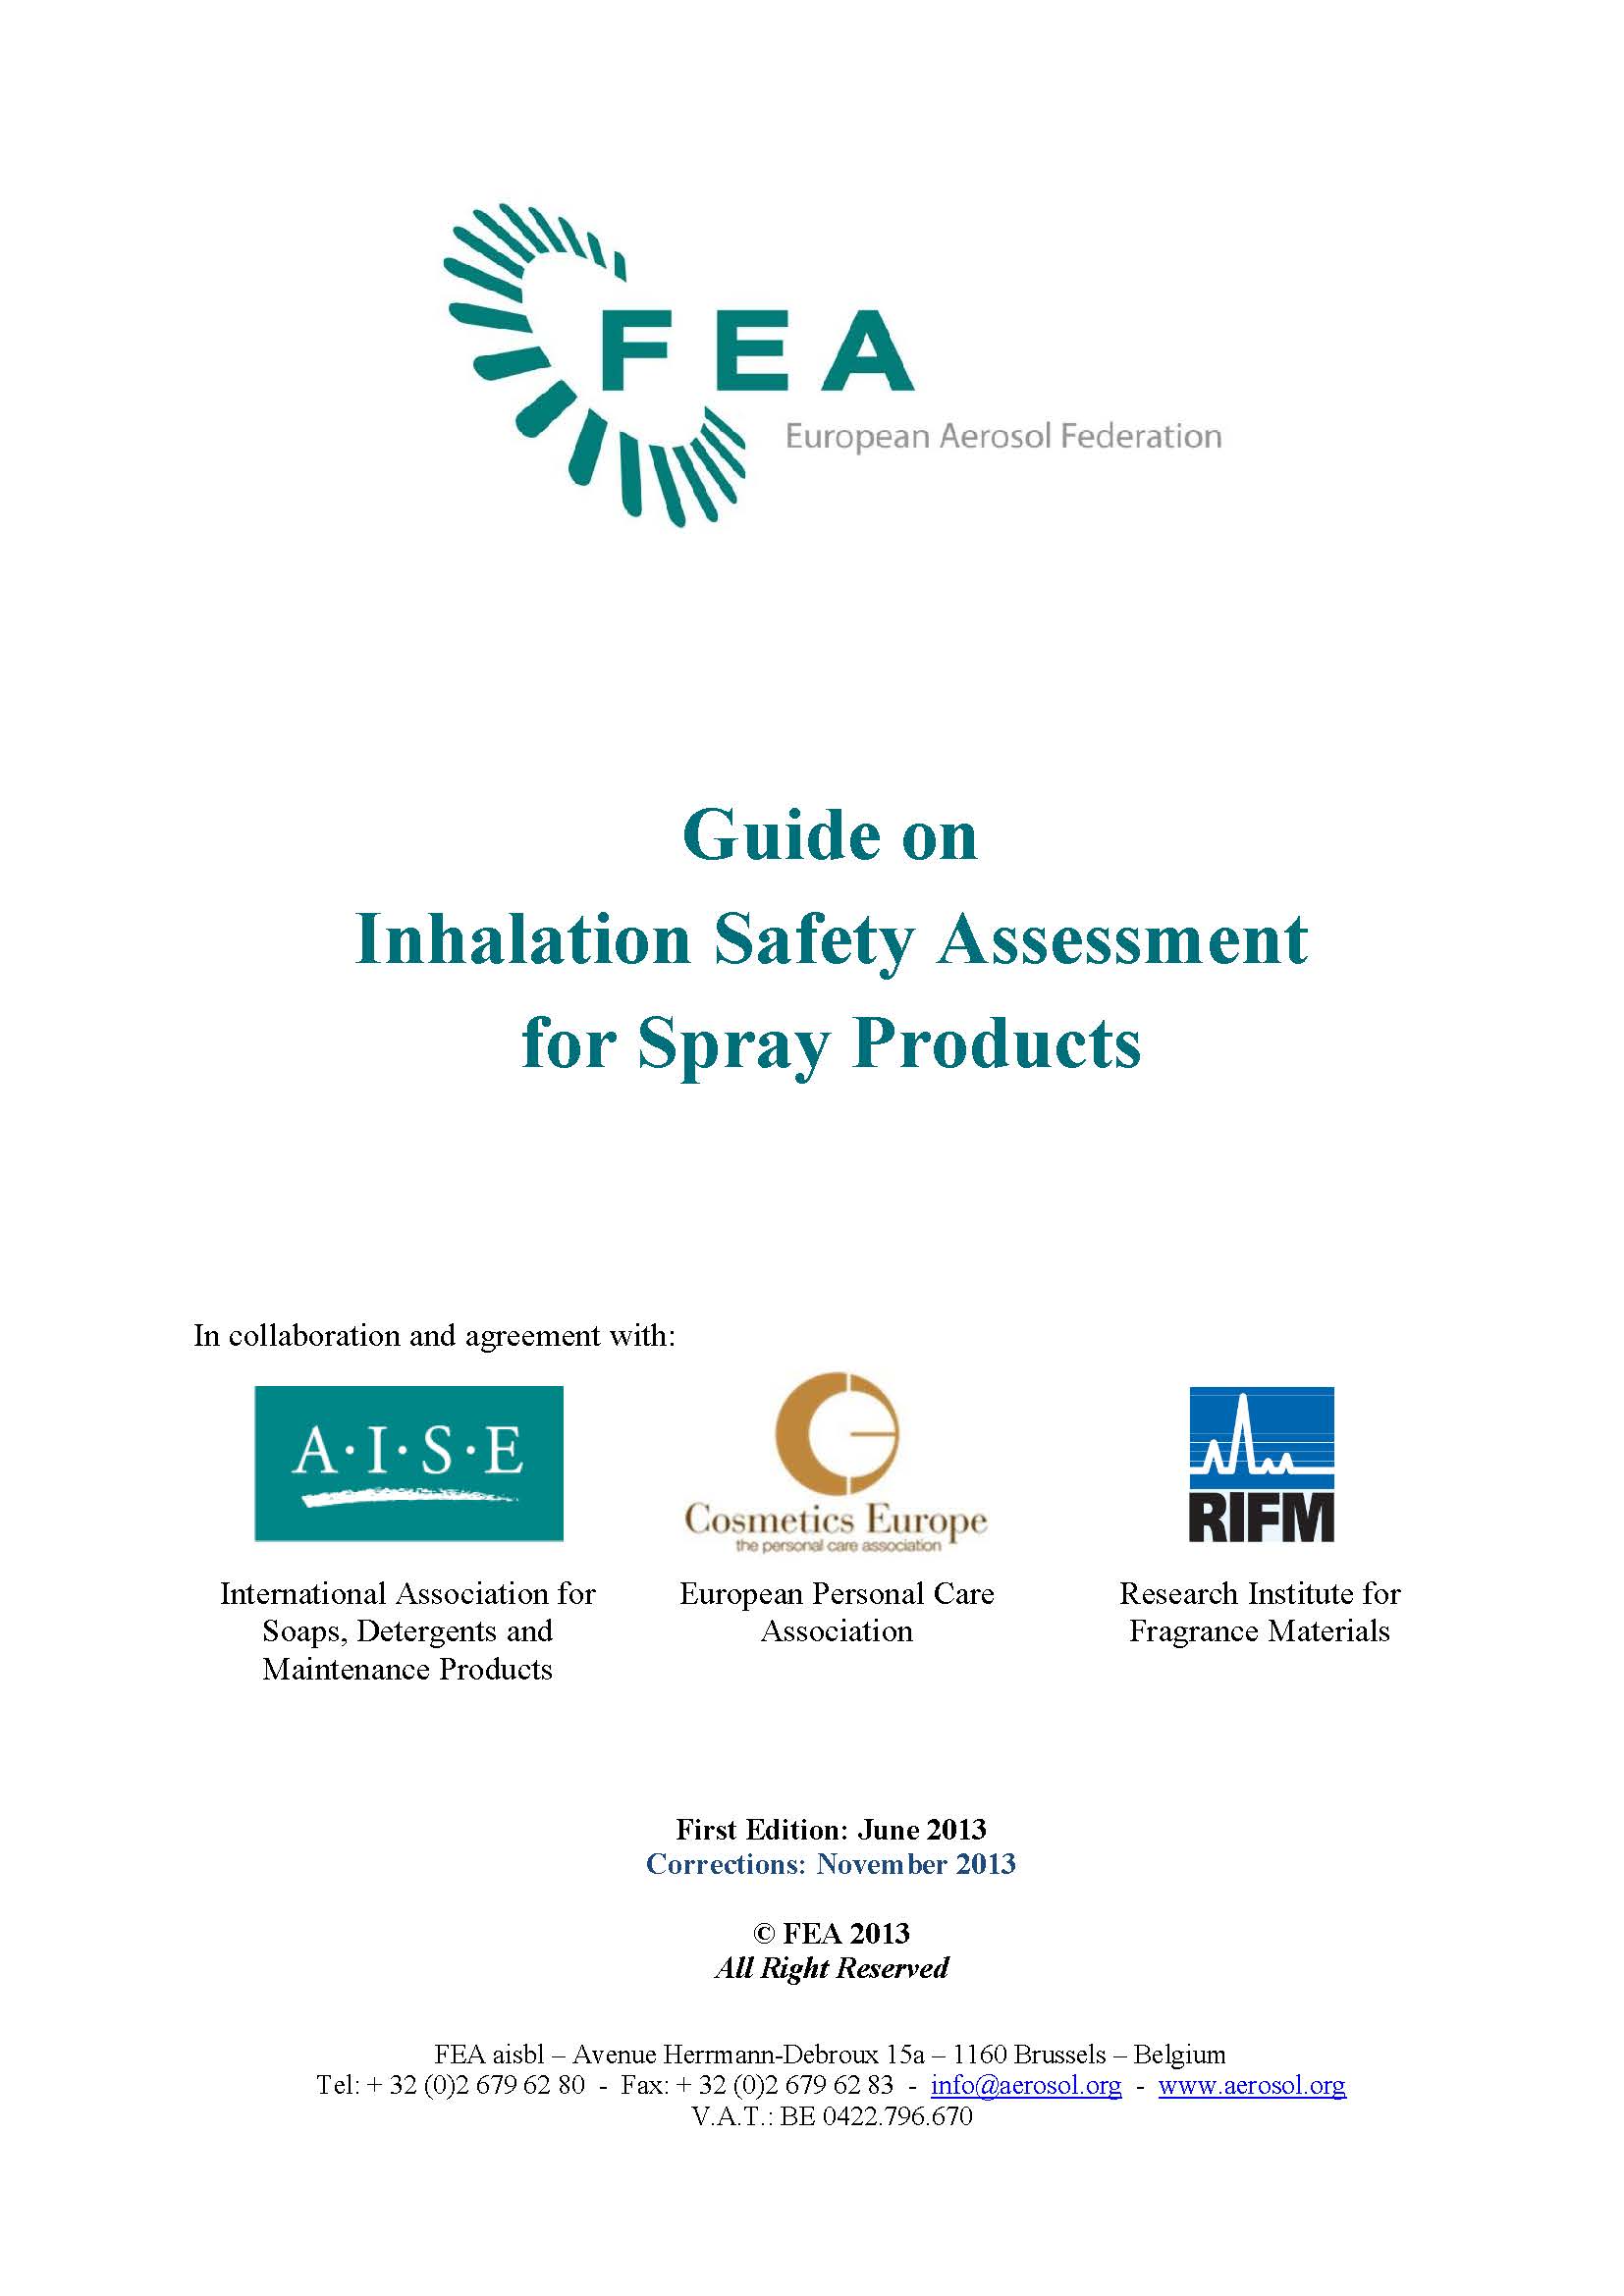 FEA Guide on Inhalation Safety Assessment for Spray Products